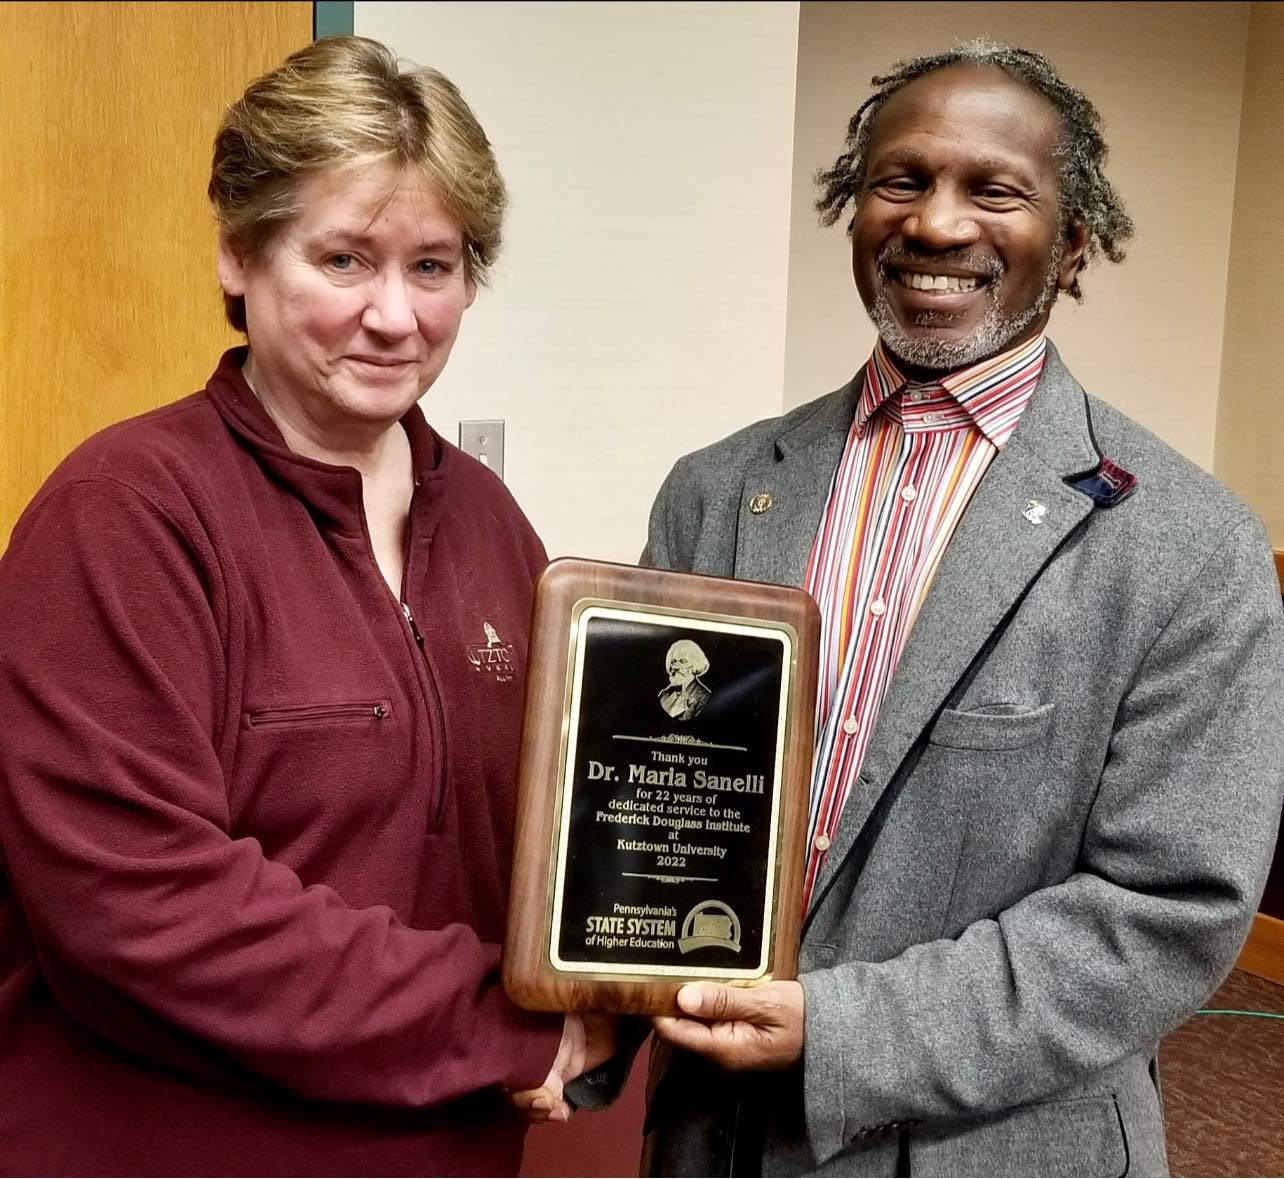 Maria Sanelli and Joseph Croskey smiling and holding the PASSHE Frederick Douglass Institute Director plaque 